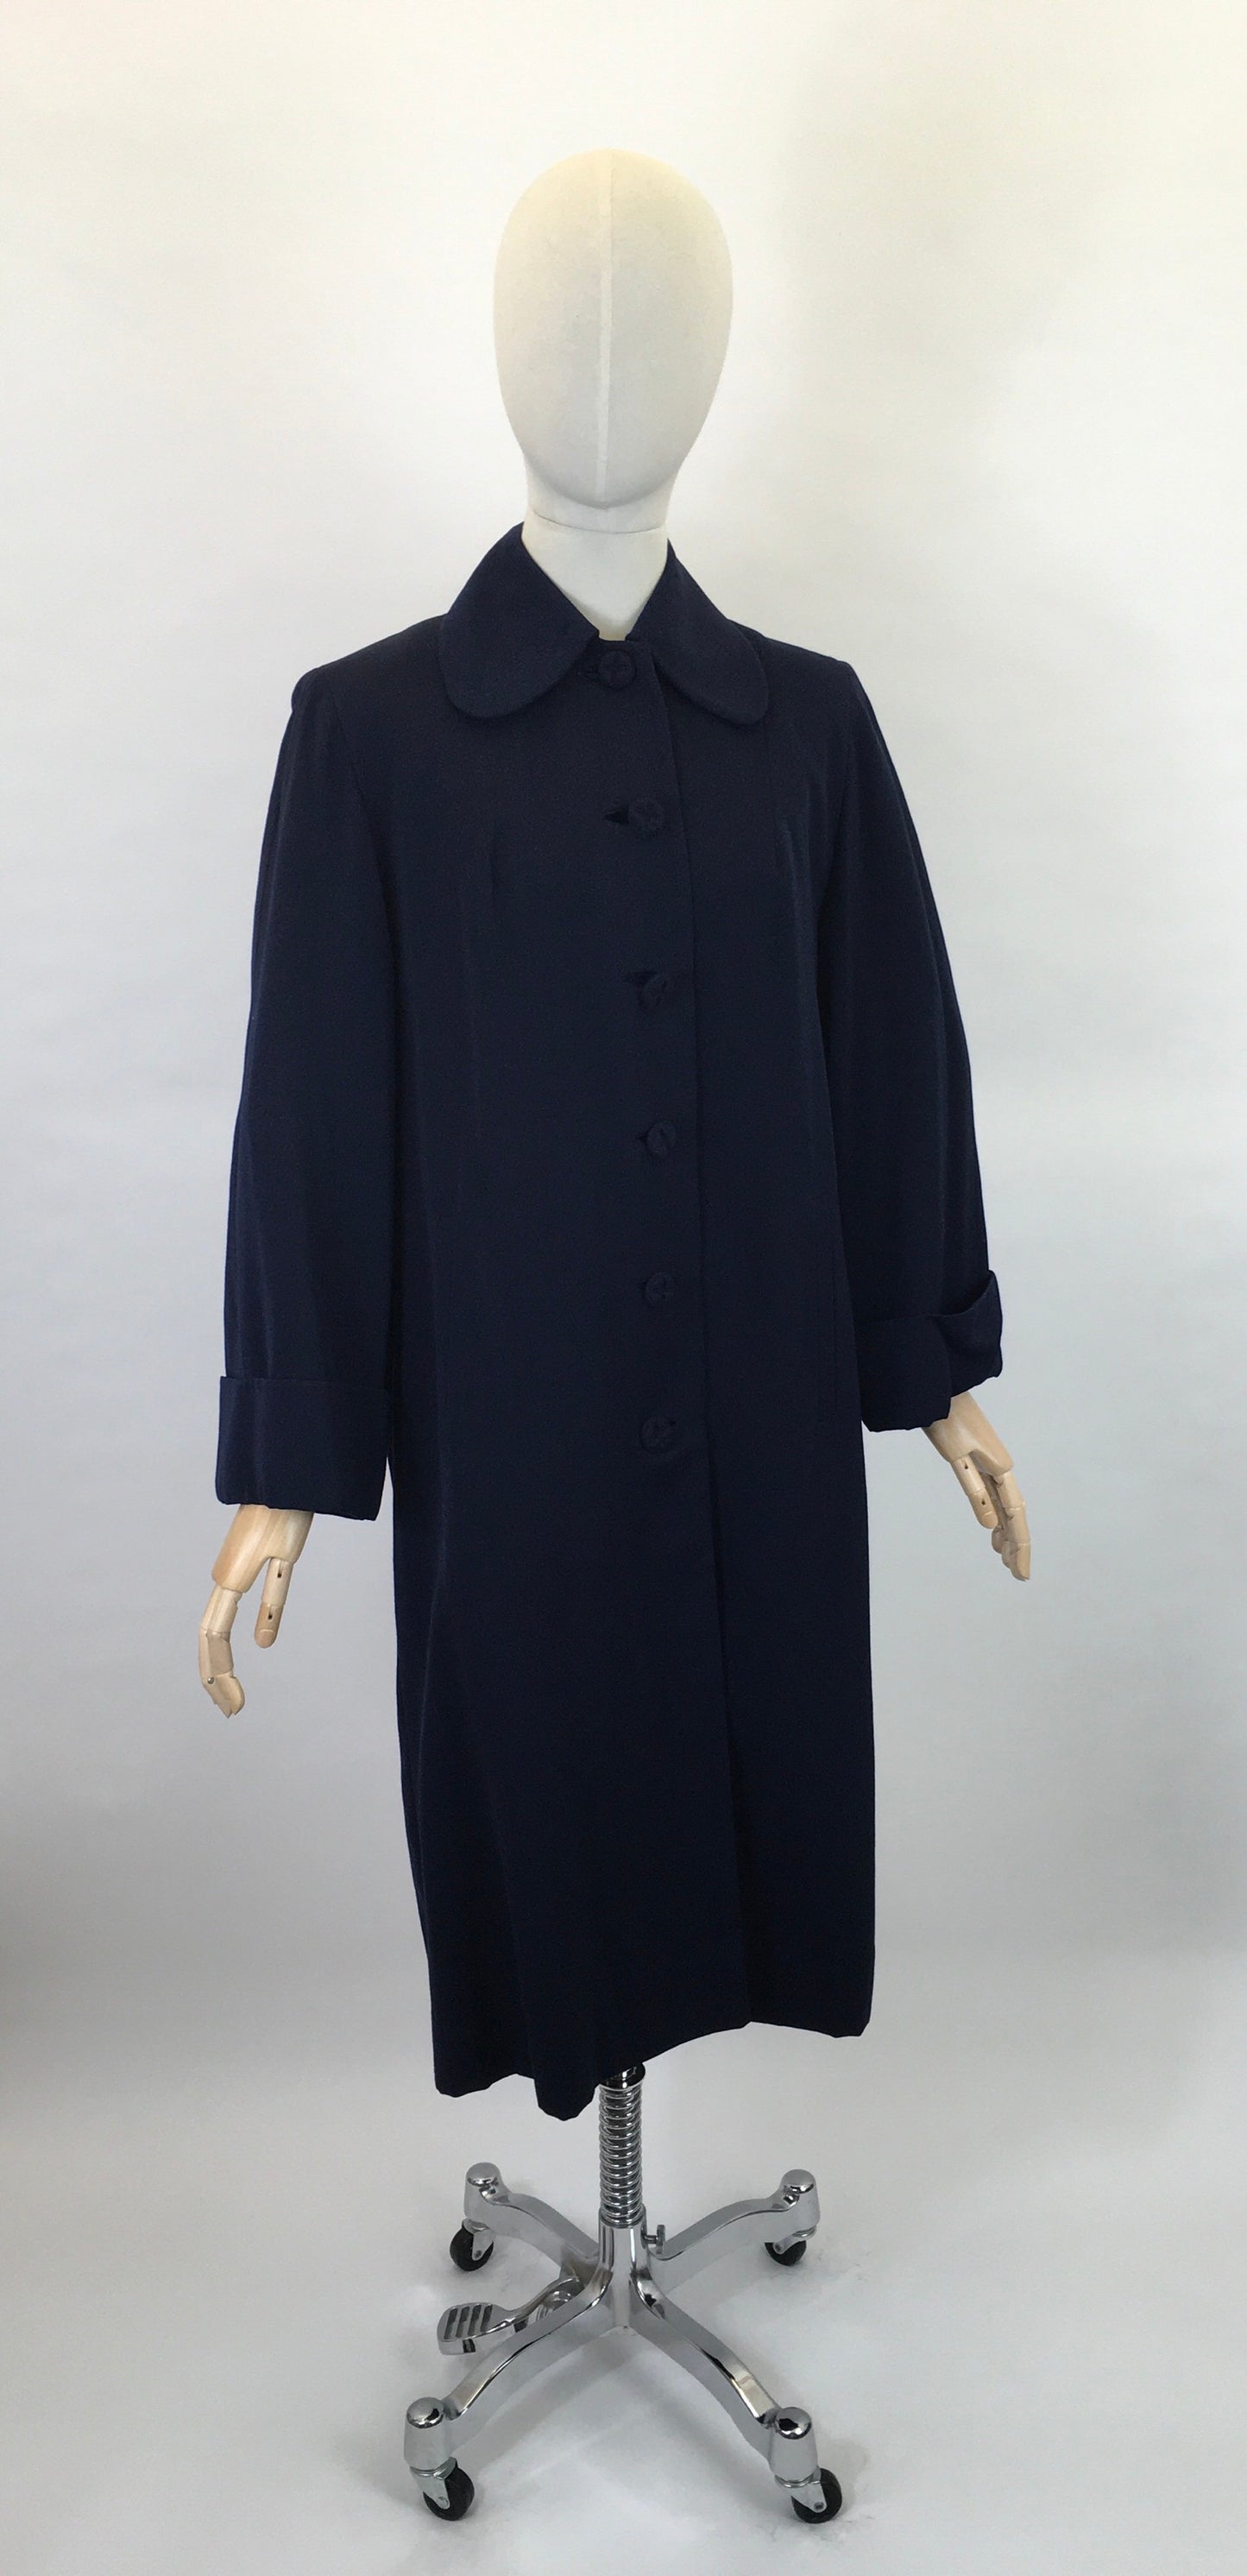 Original 1940’s Navy Gabardine Coat - A Lovely 40’s Silhouette with Beautiful Details